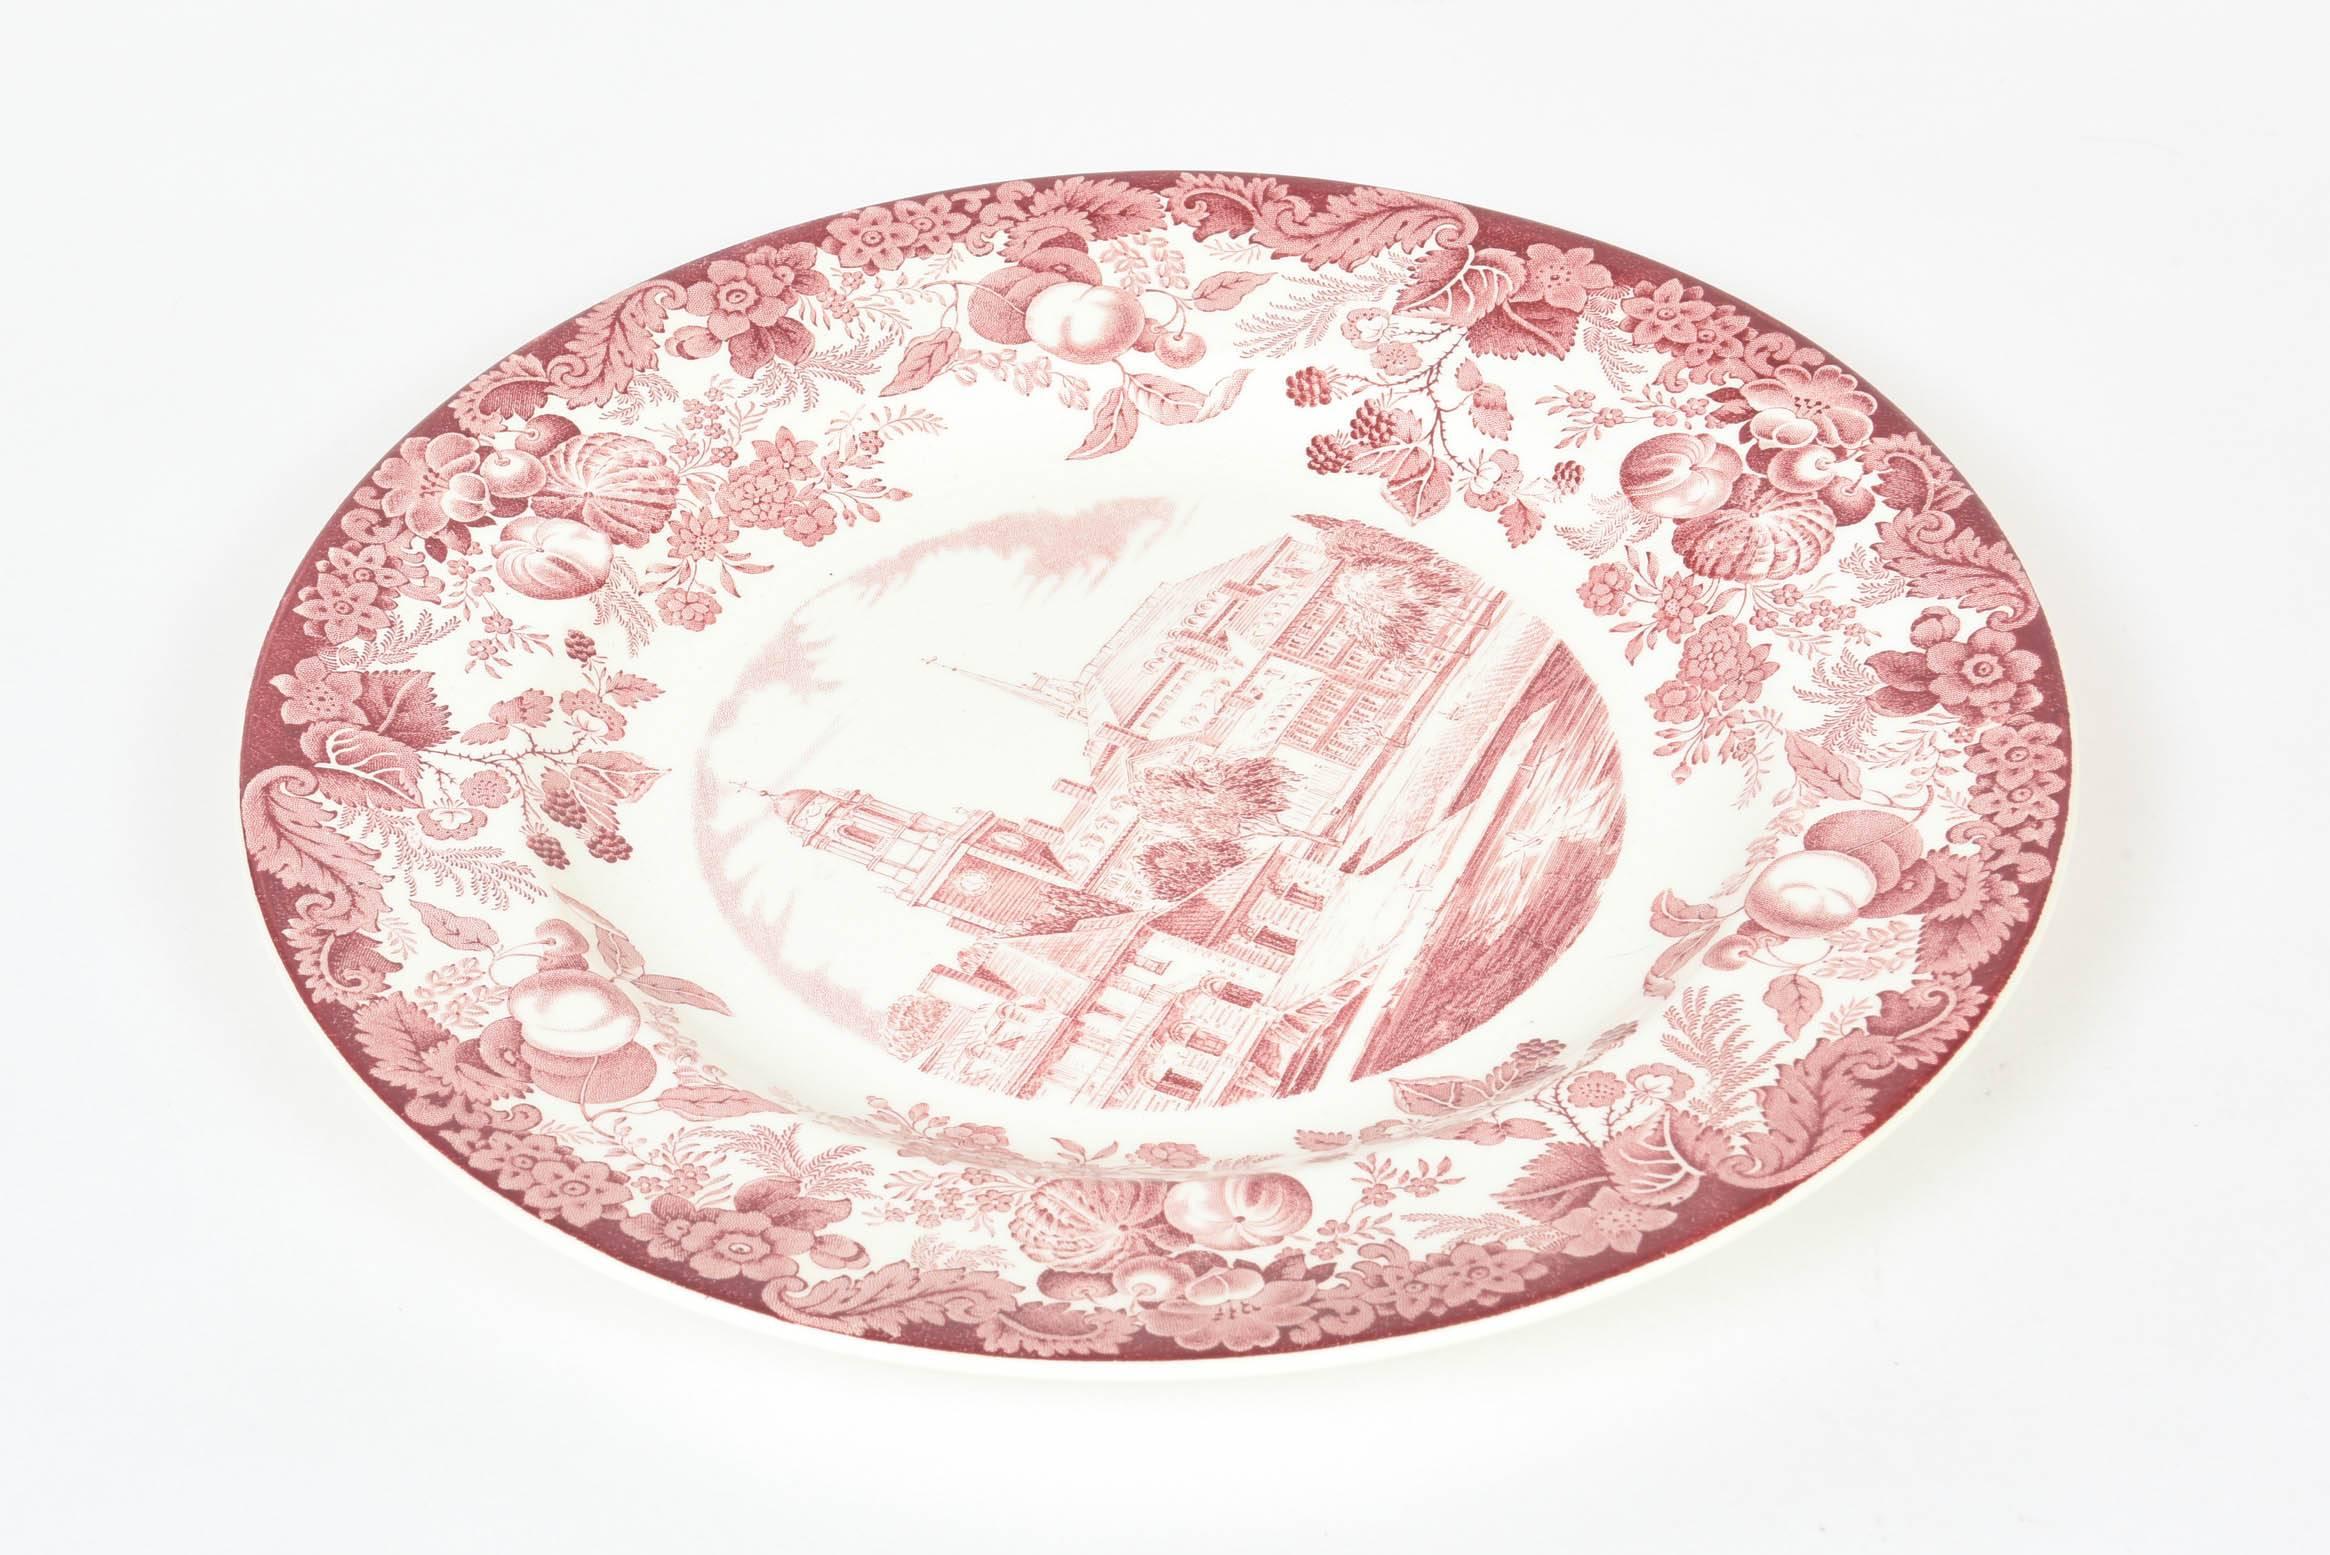 The classic designs Wedgwood produced for the university in their signature red. This grouping that we will be offering please inquire (many dinner plates, salad plates, demi tasse cup and saucer sets, huge platter) features crisp transferred scenes